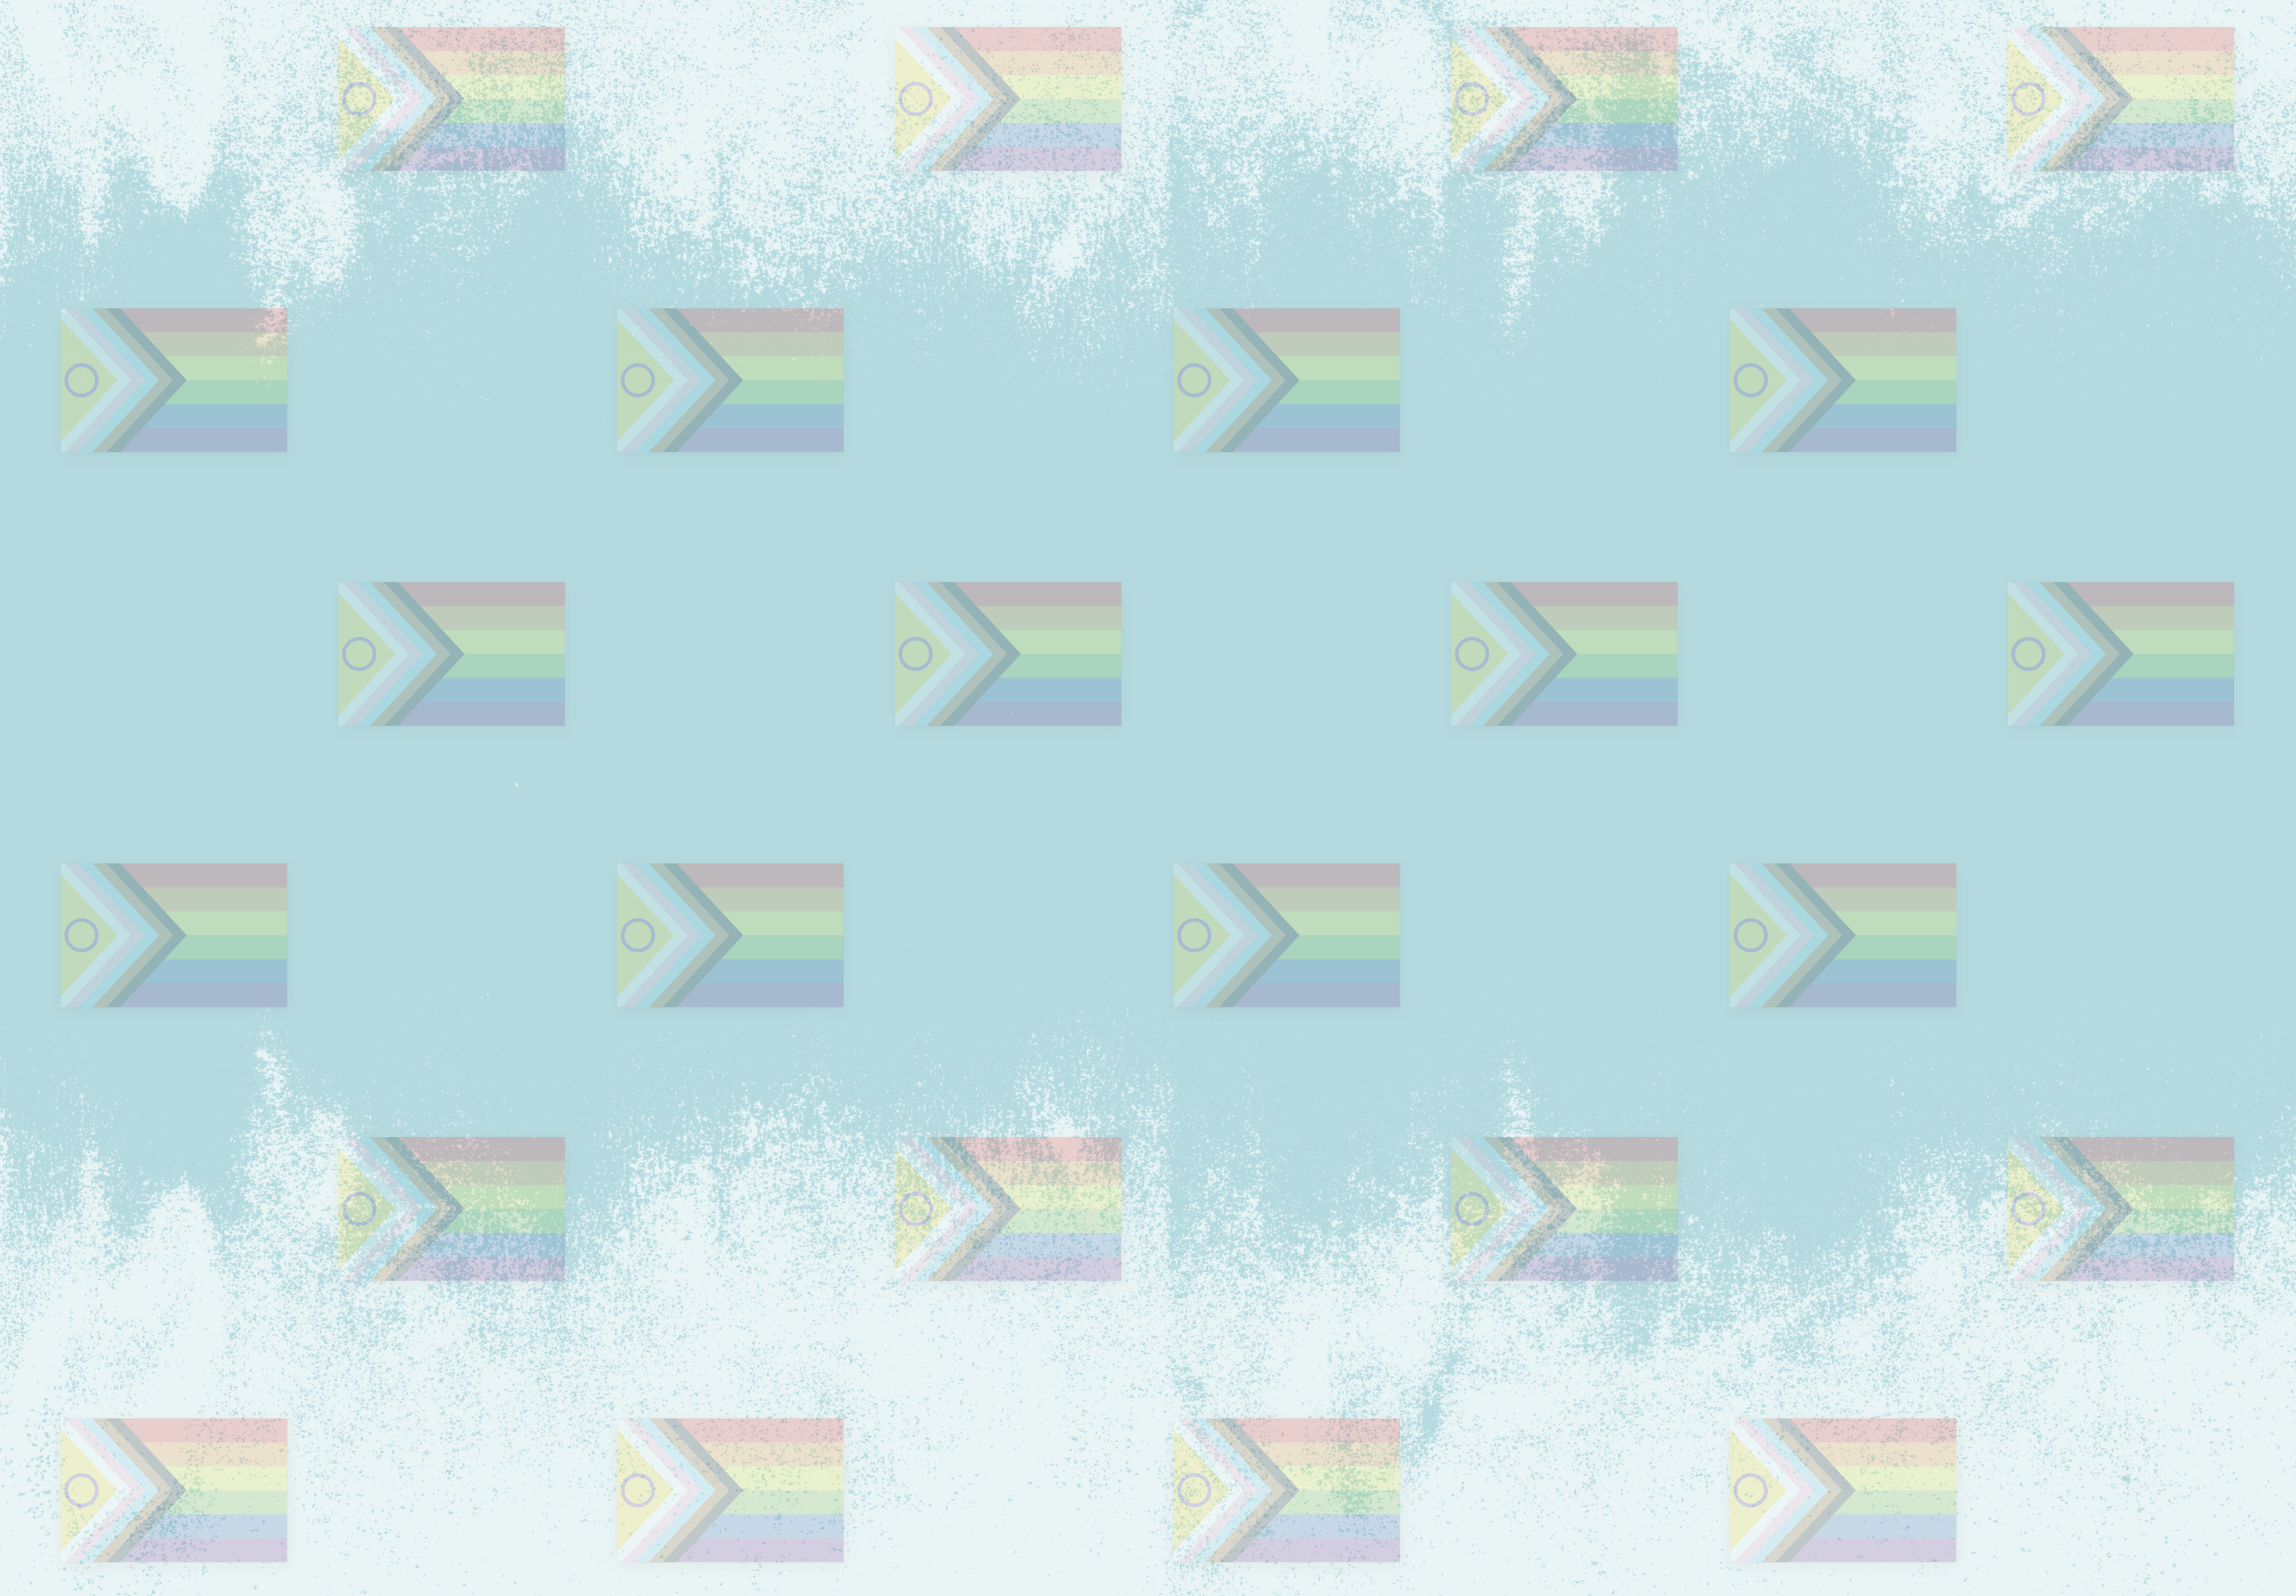 Image: Textured blue background with a collage of progress pride flags.